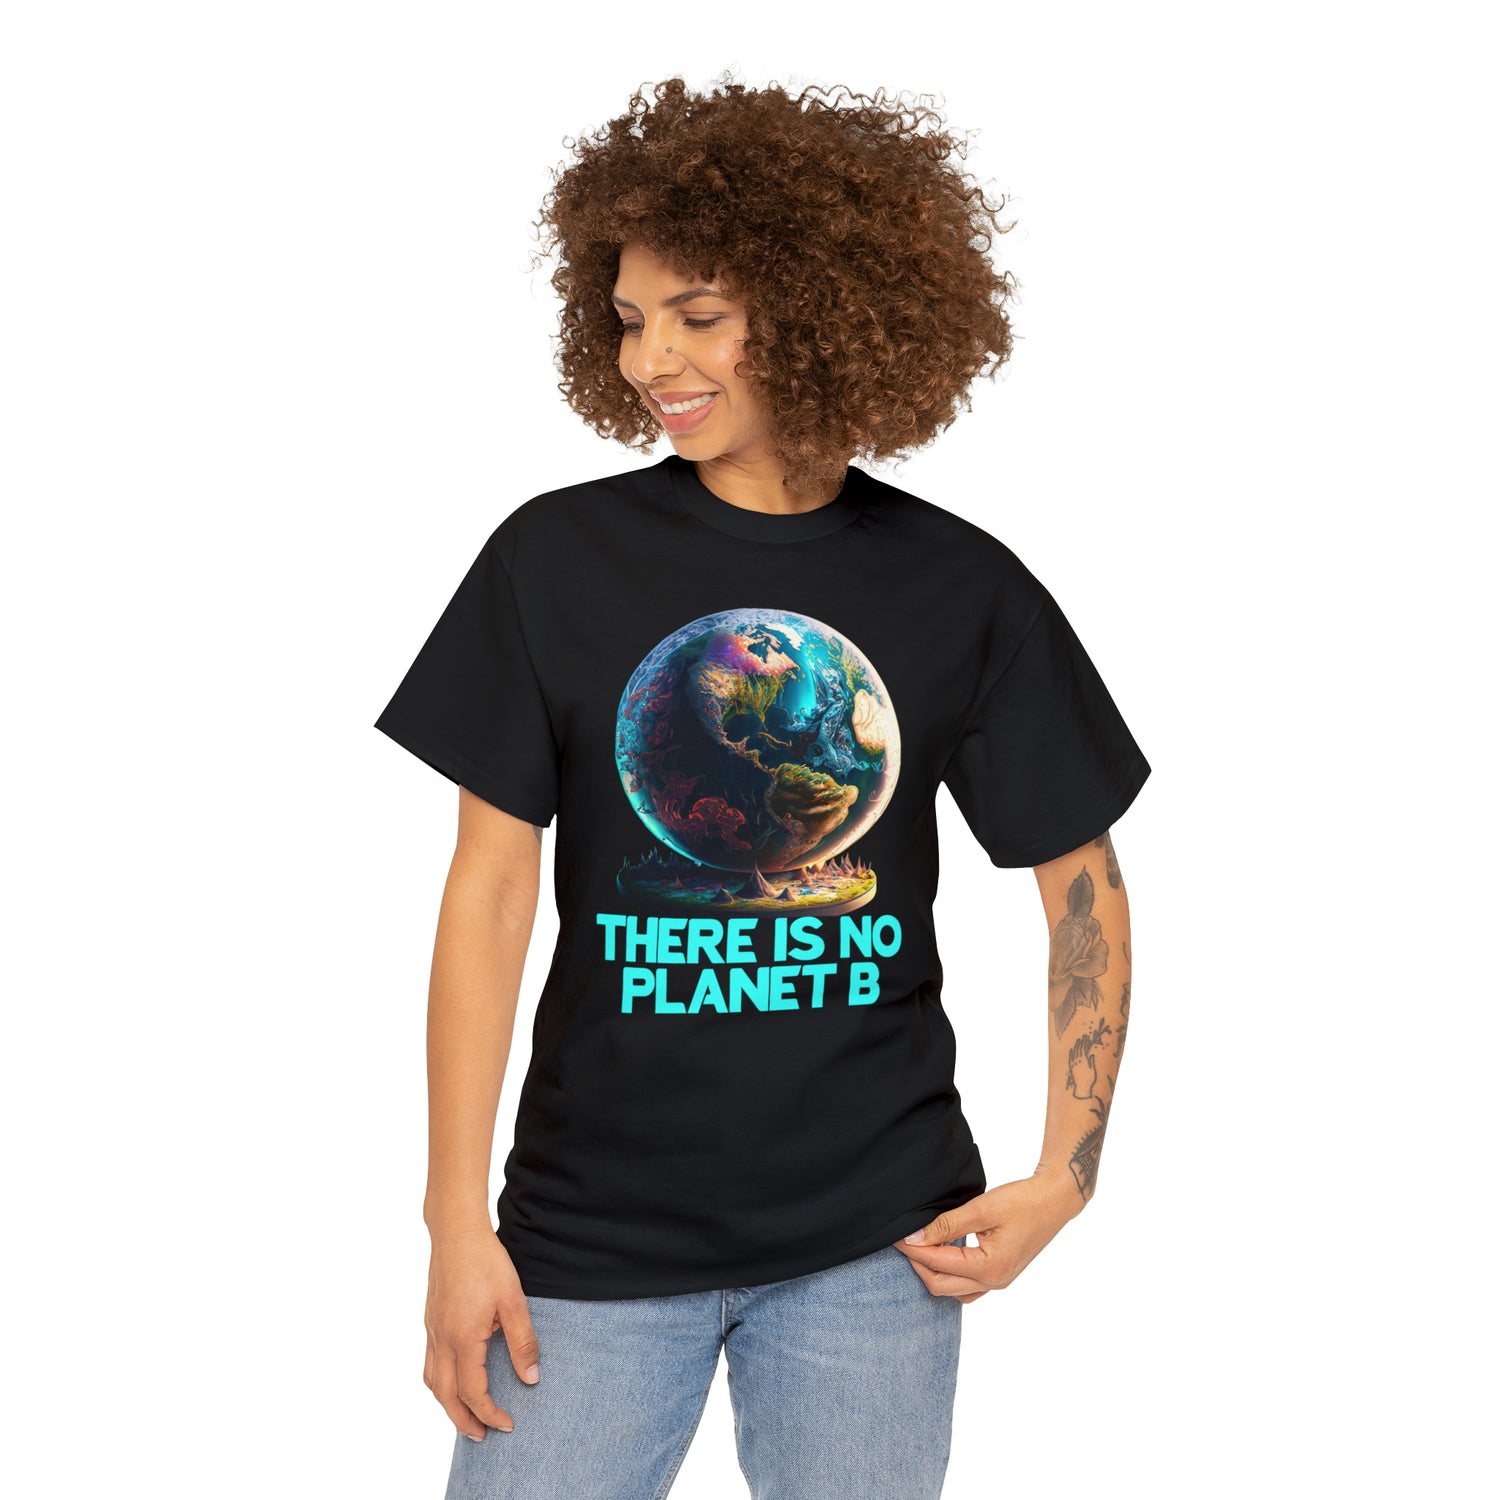 Embrace Planet-Positive Fashion with Our "There Is No Planet B" T-Shirt